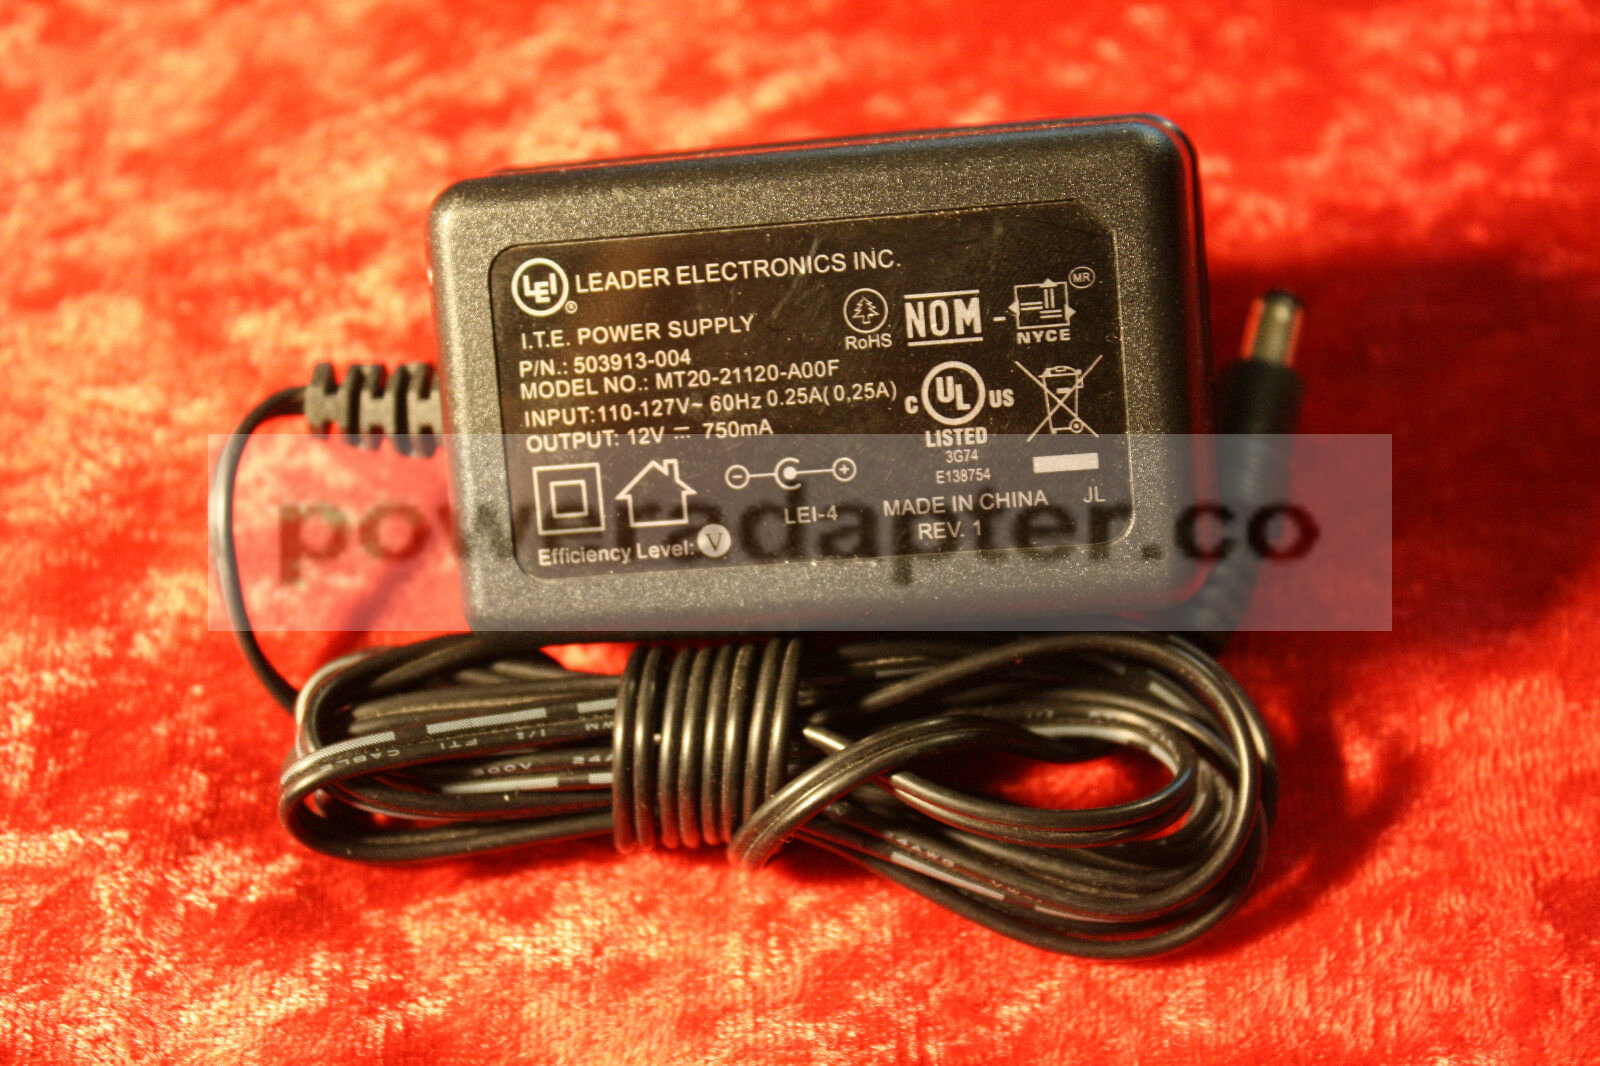 LEI Leader 503913-004 12V 750mA AC to DC Power Supply Adapter MT20-21120-A00F Condition: new Type: AC to DC Wall Cha